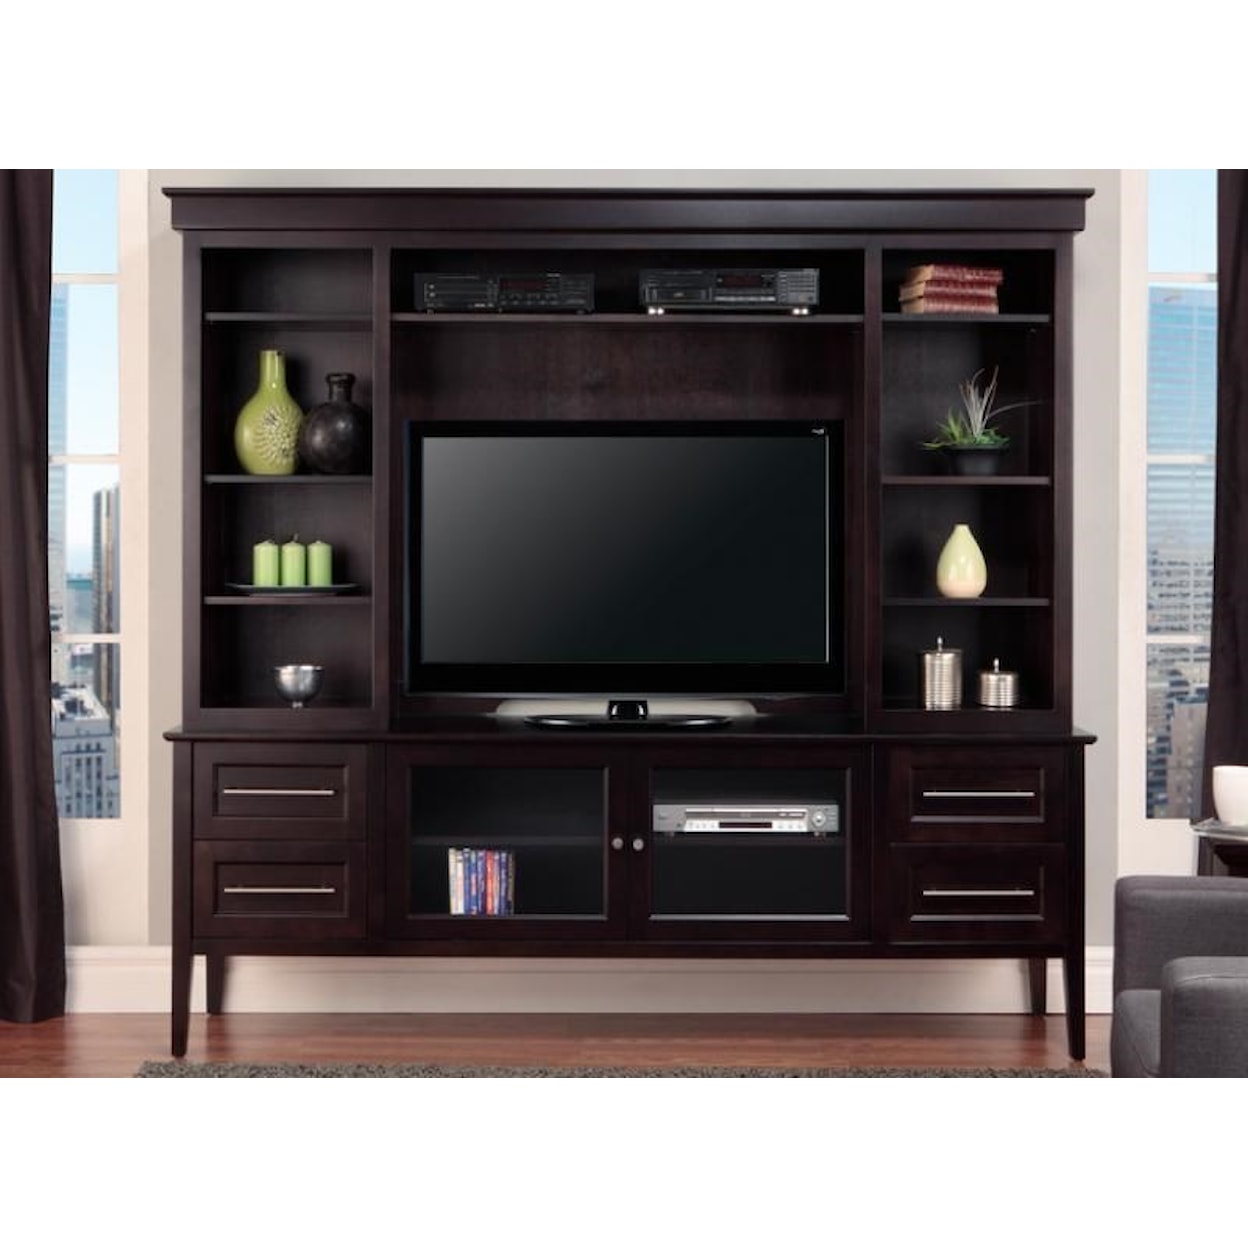 Handstone Stockholm Solid Wood HDTV Cabinet with Hutch